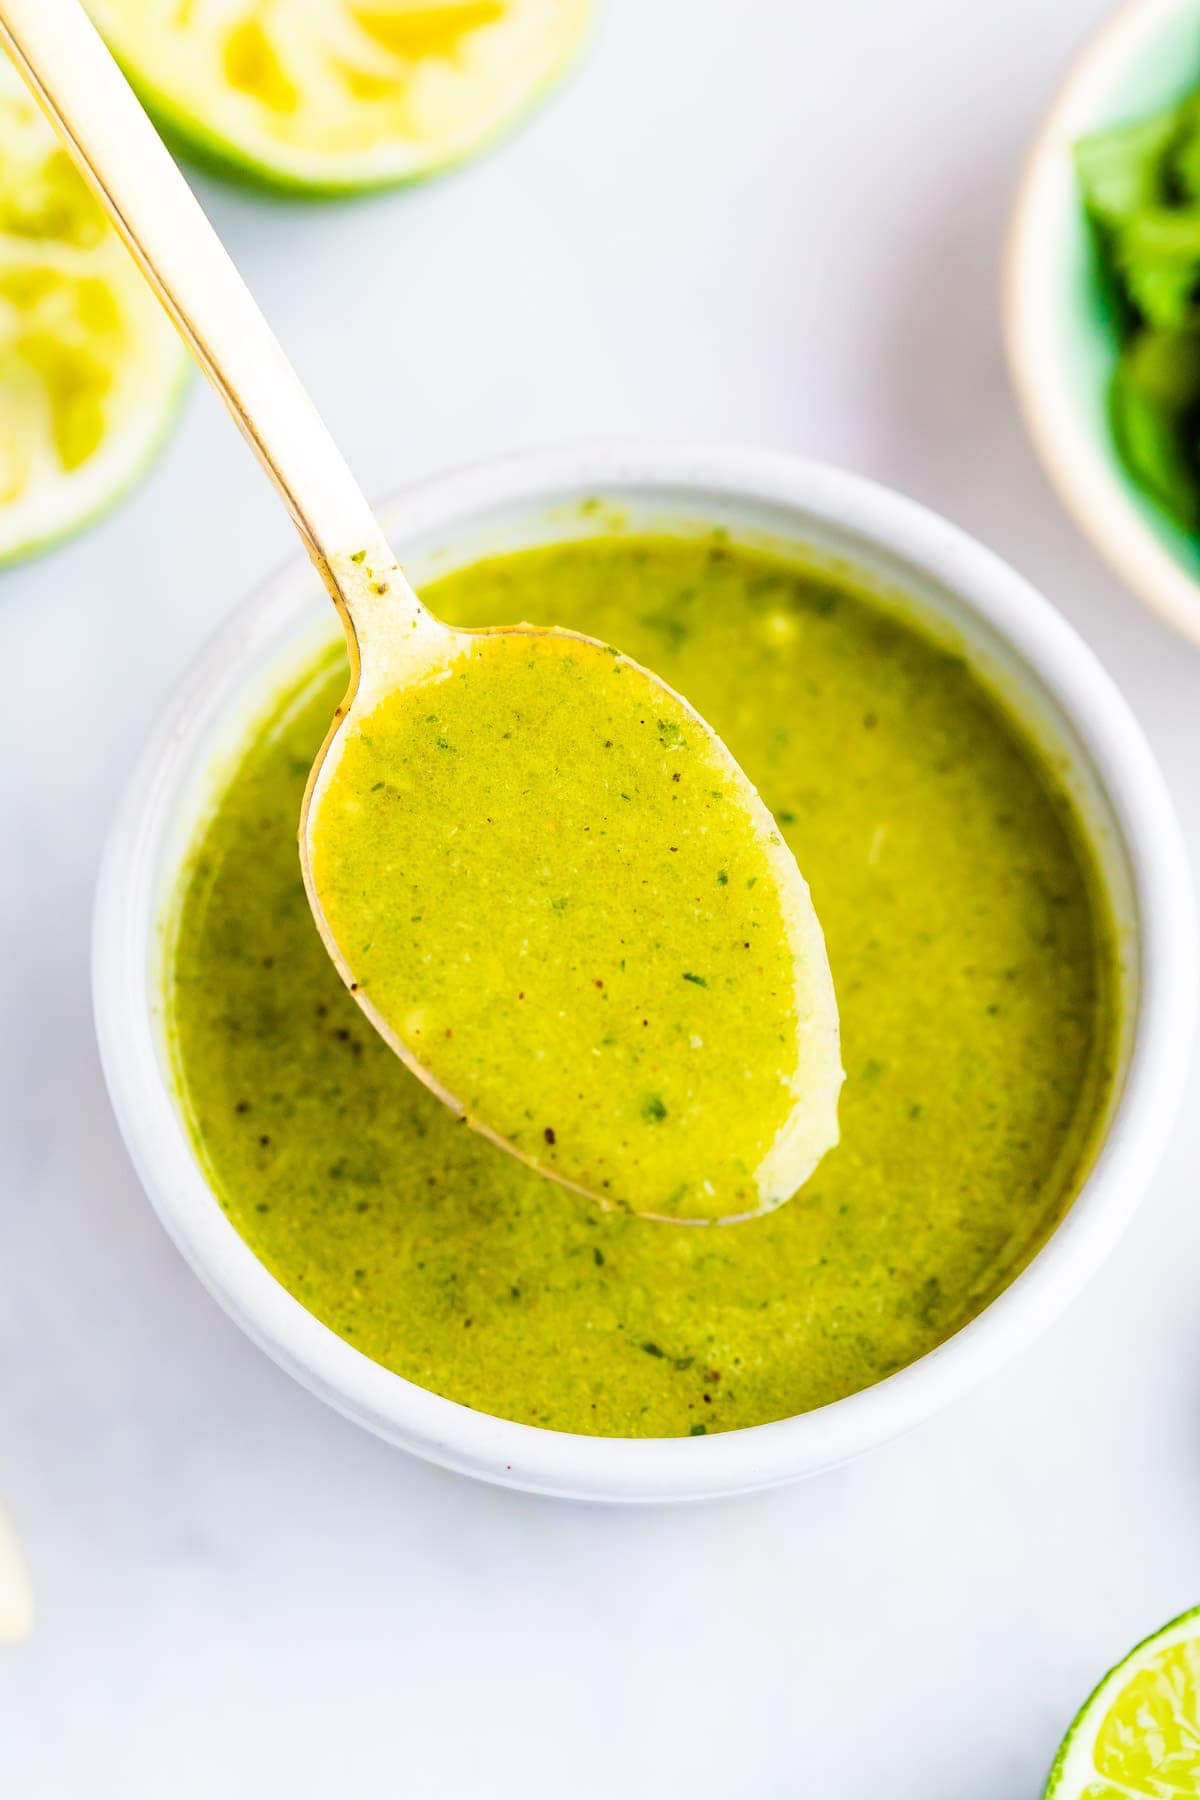 Spoon with a spoonful of cilantro lime dressing.